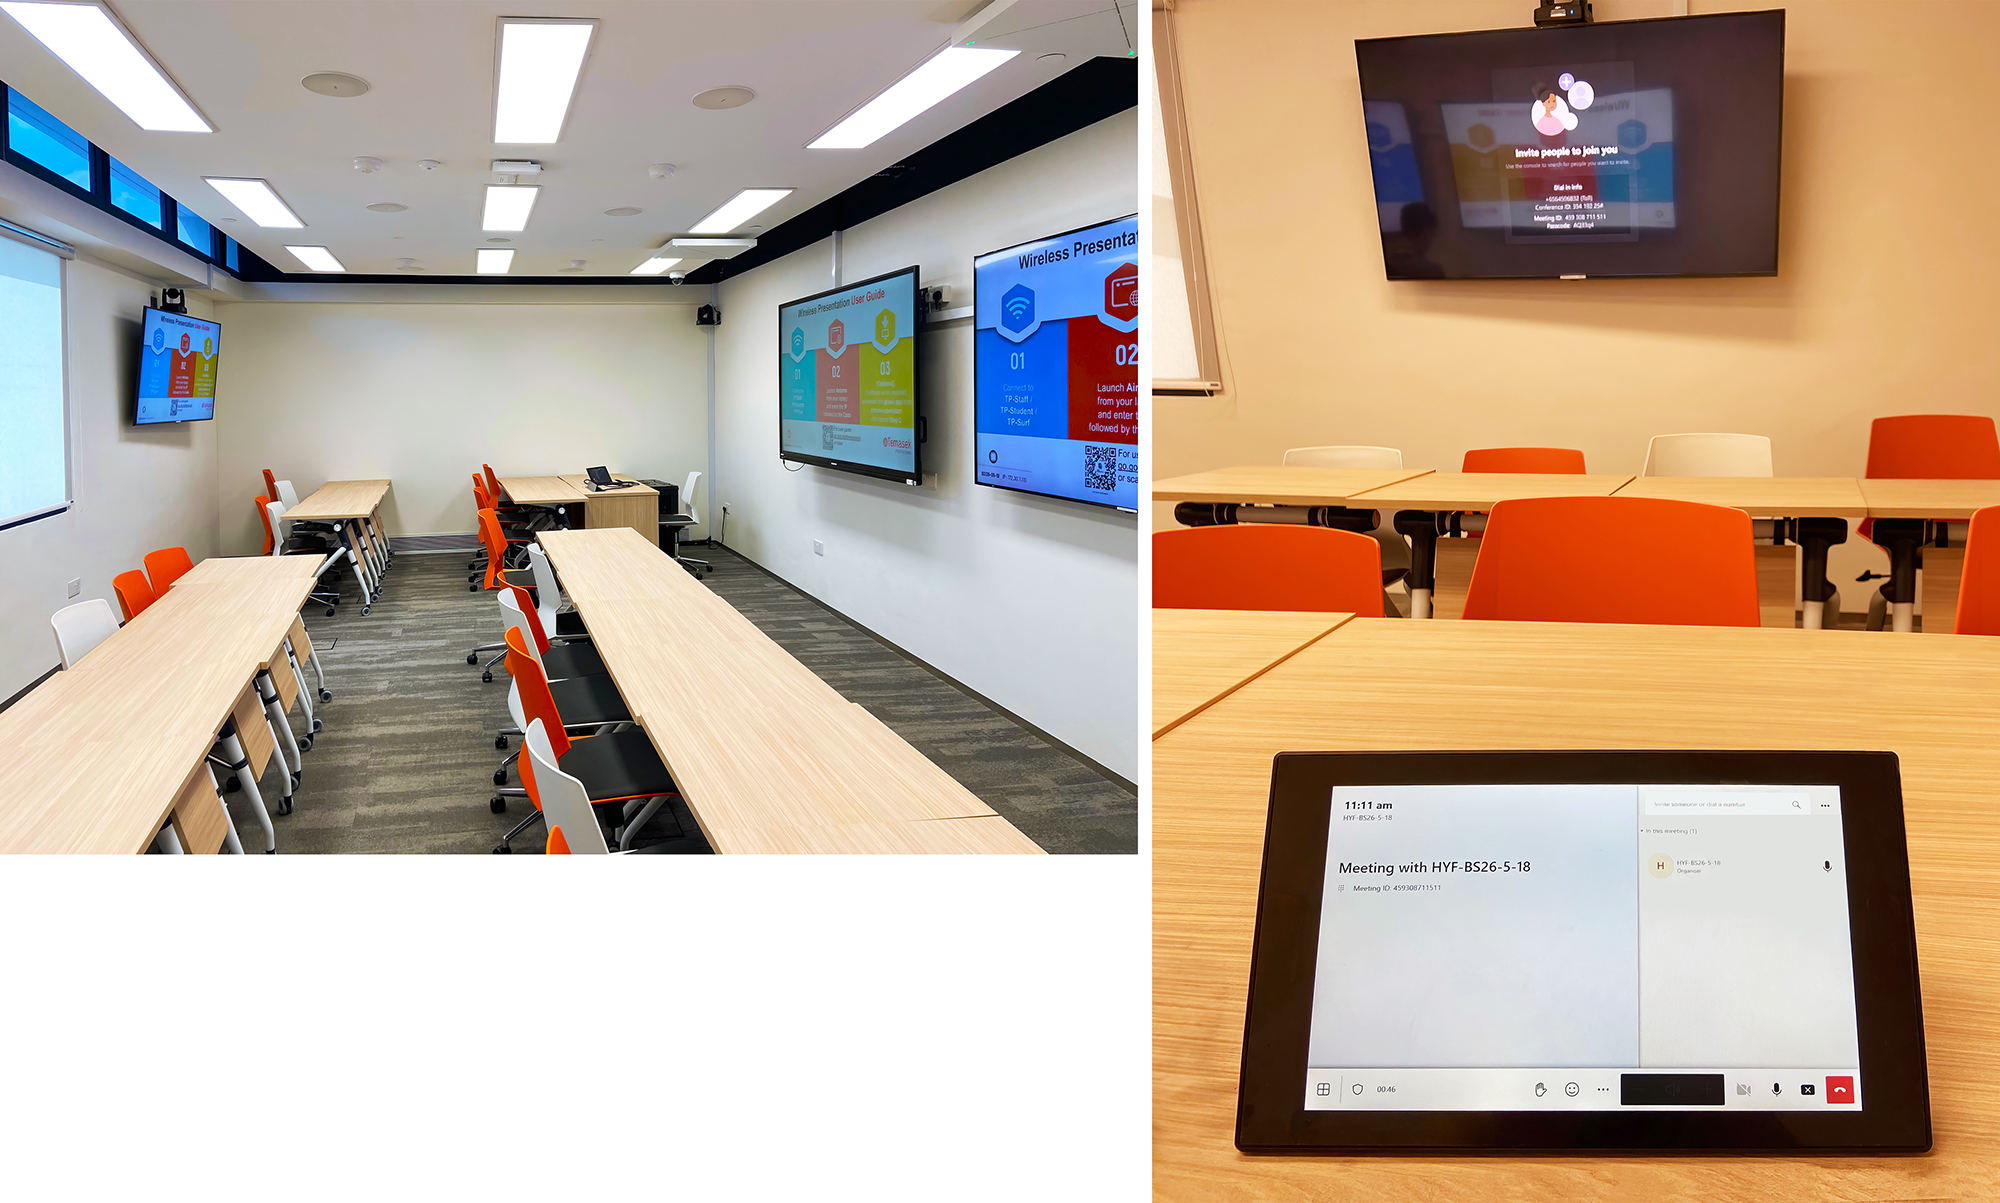 This HyFlex classroom is configured for conventional lecture delivery. Students in the classroom sit at rows of desks facing the displays. Remote students view the room through PTZ cameras.